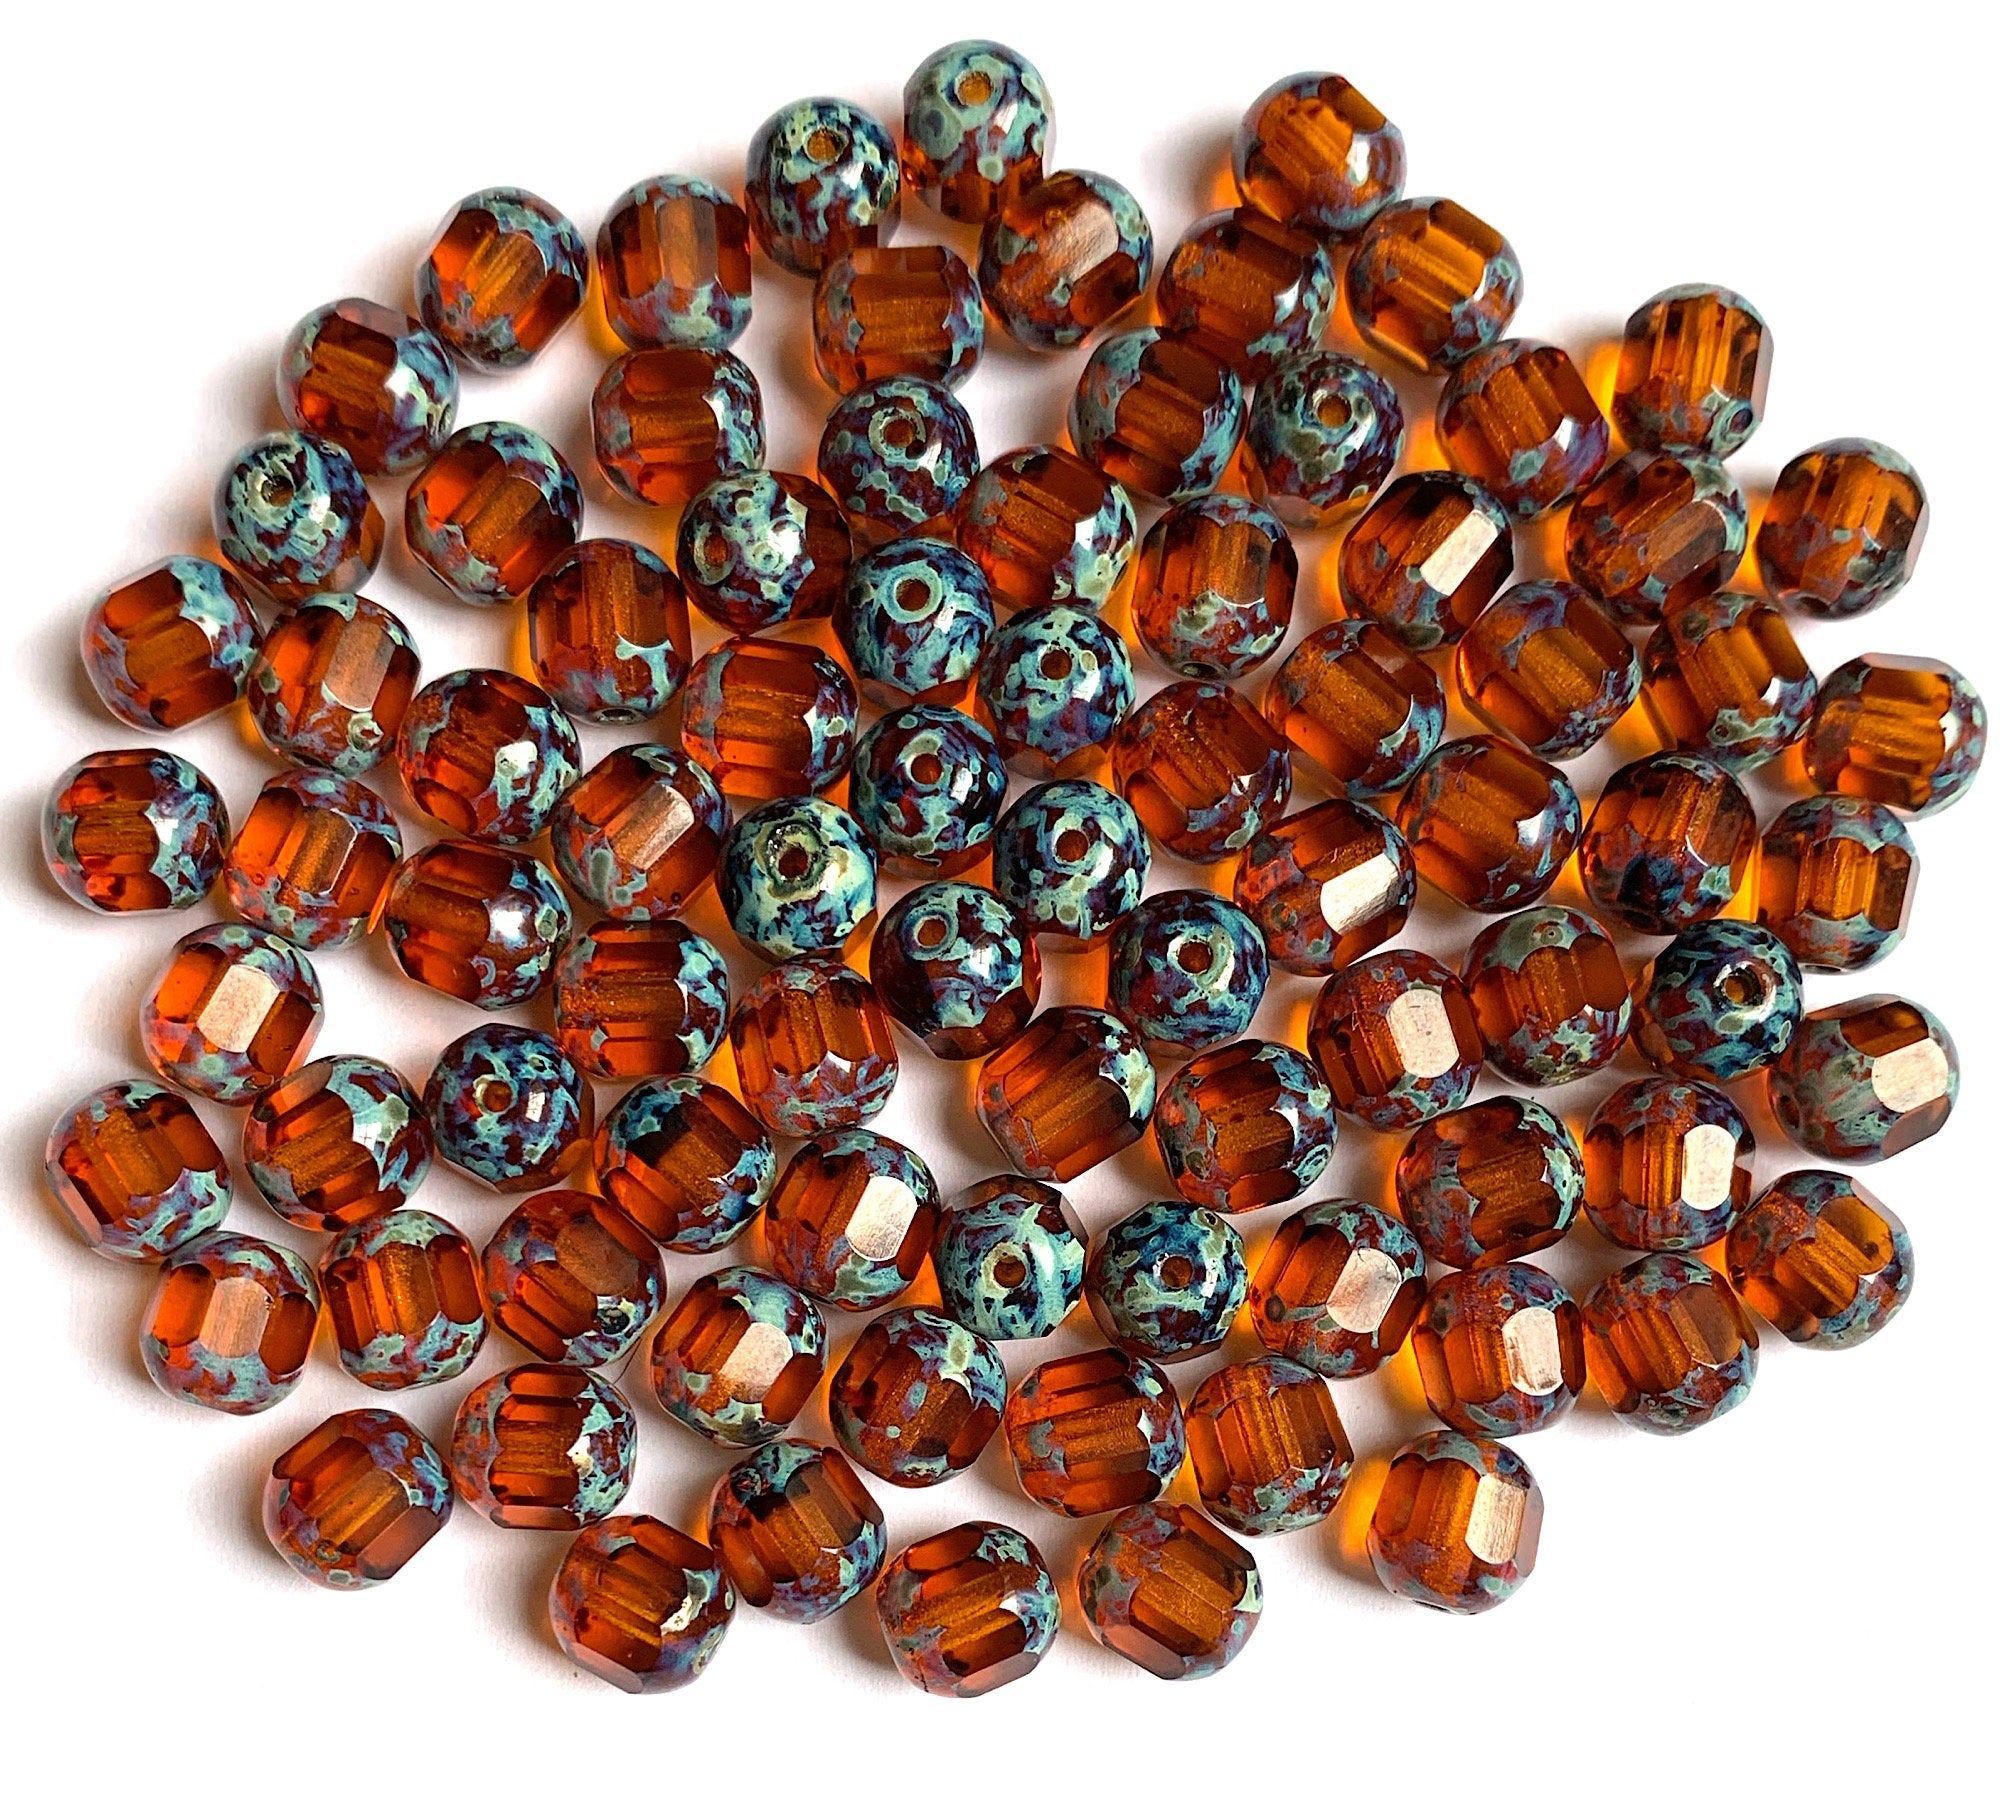 *21* 7x9mm Opaque Orange Travertine Fire Polished Teardrop Beads Czech Glass Beads by GR8BEADS - The Bead Obsession